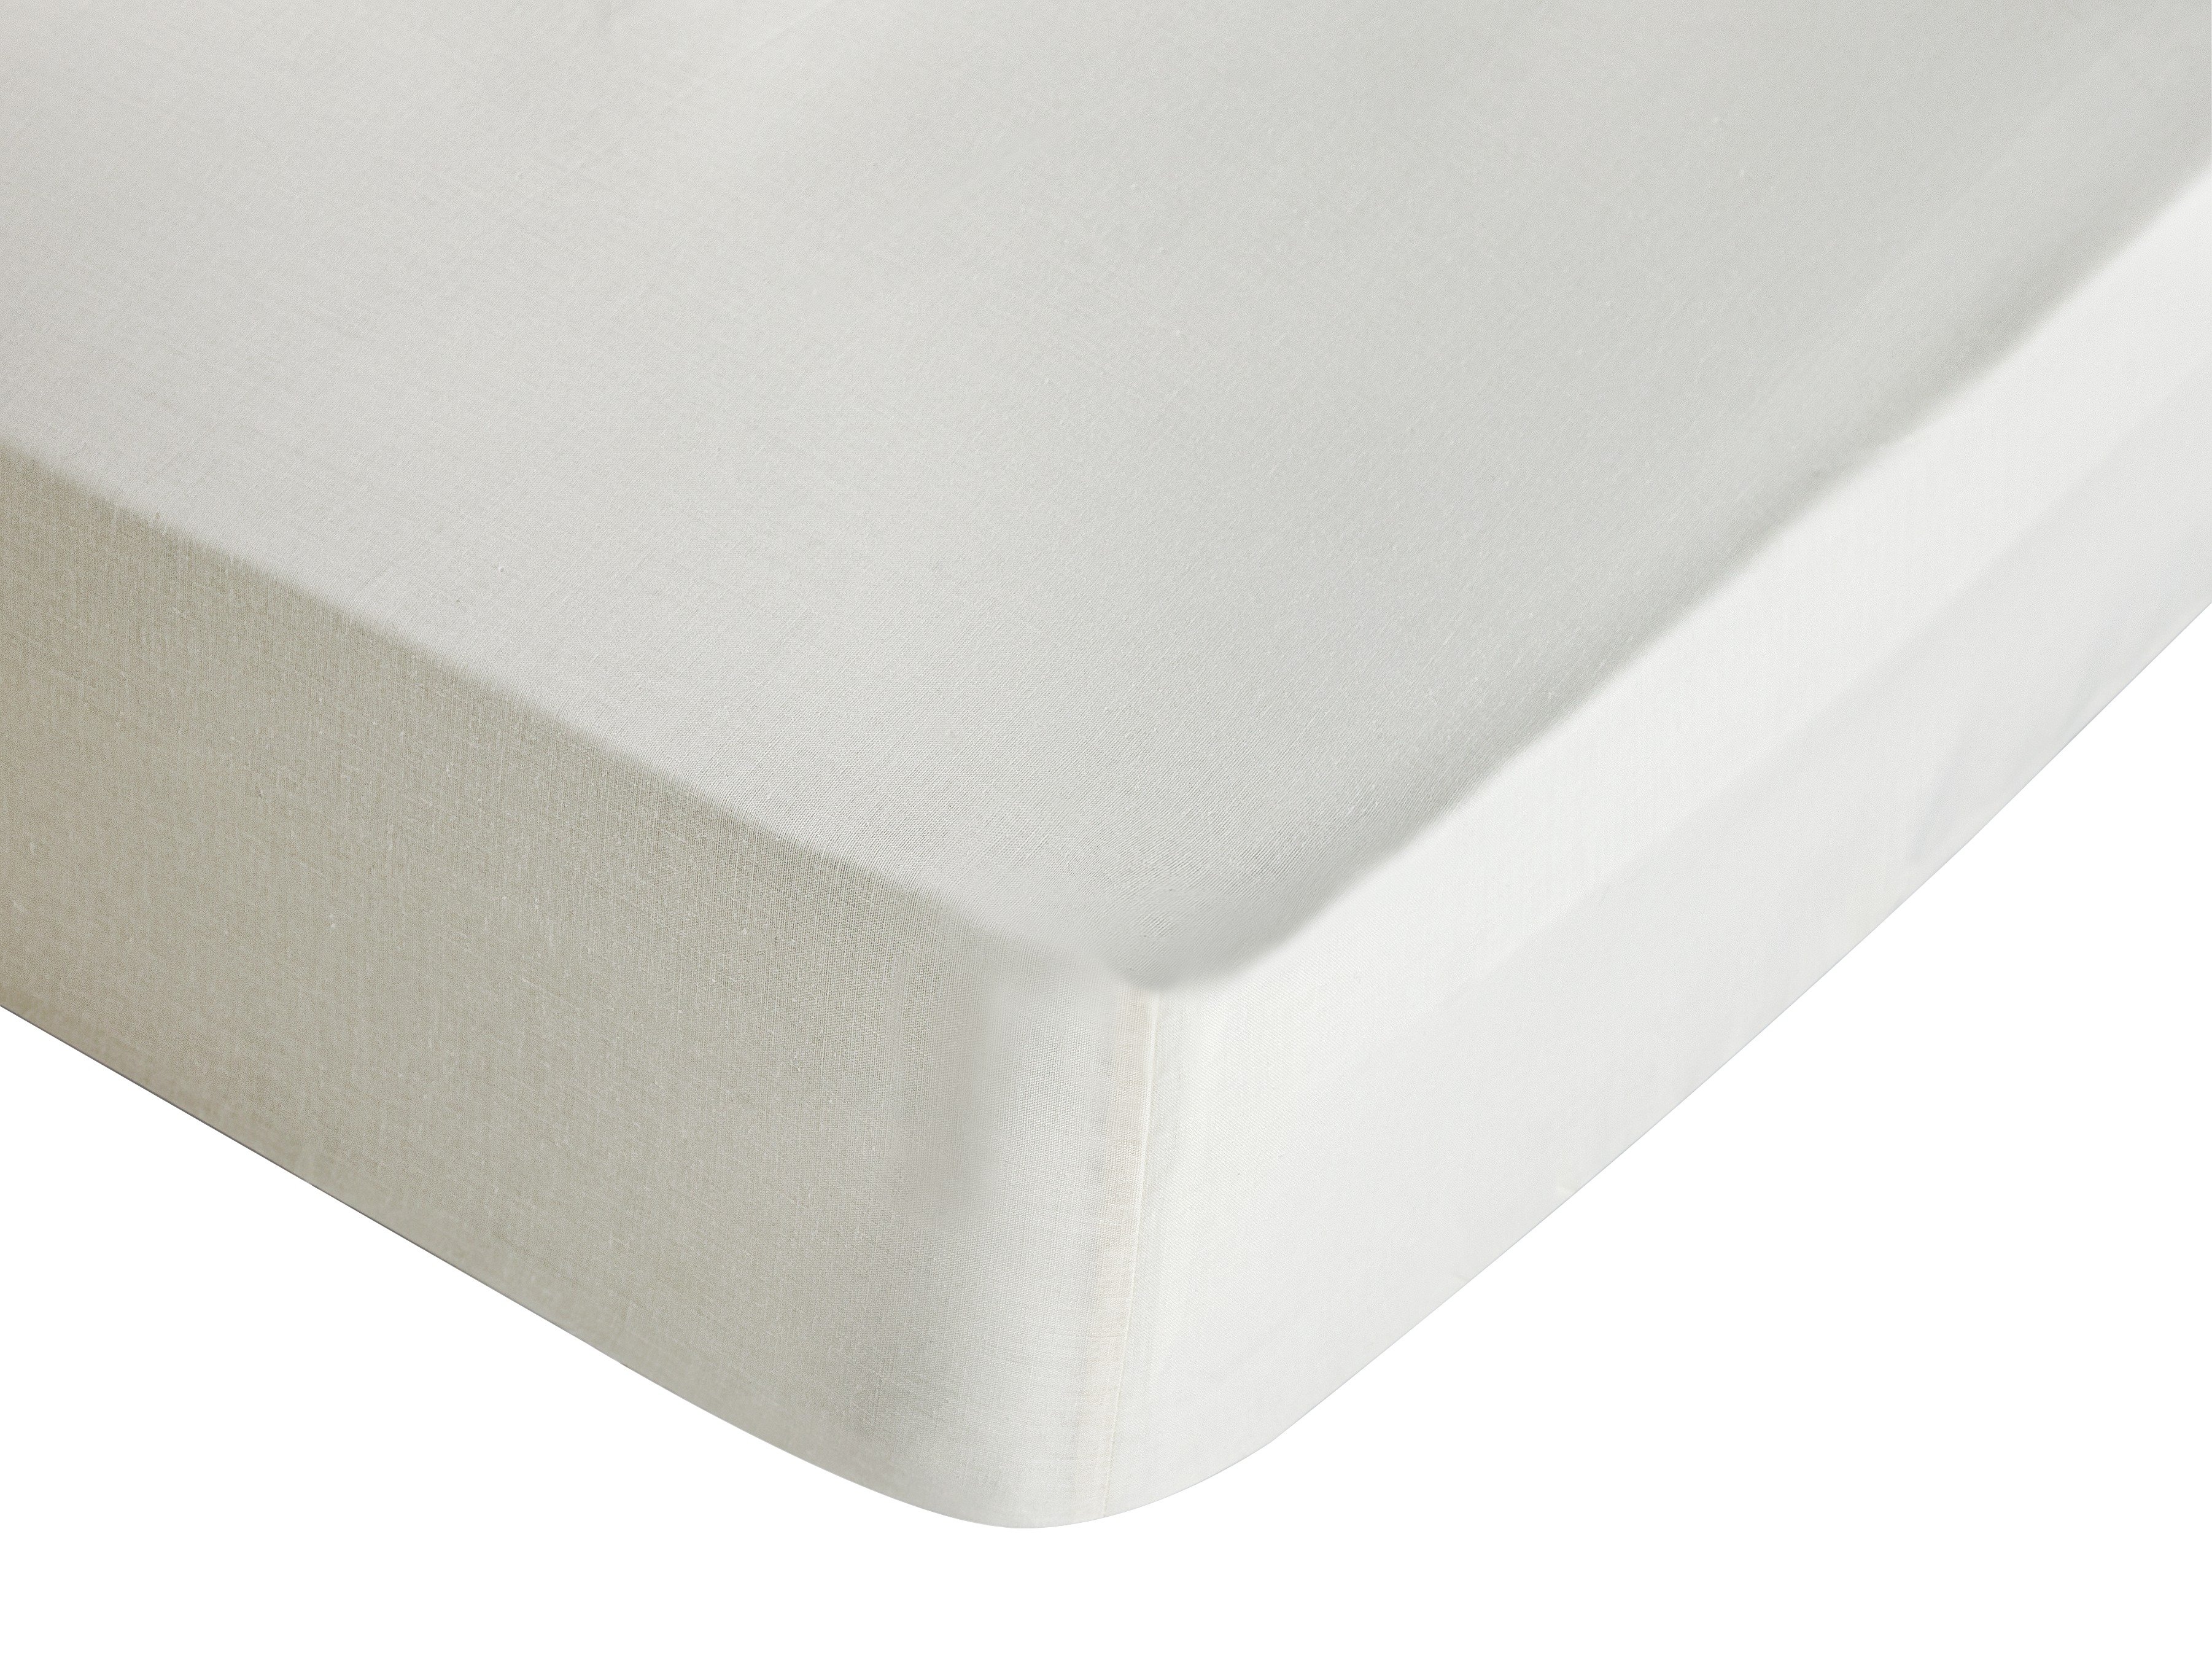 Argos Home Cotton Cream Fitted Sheet - Kingsize